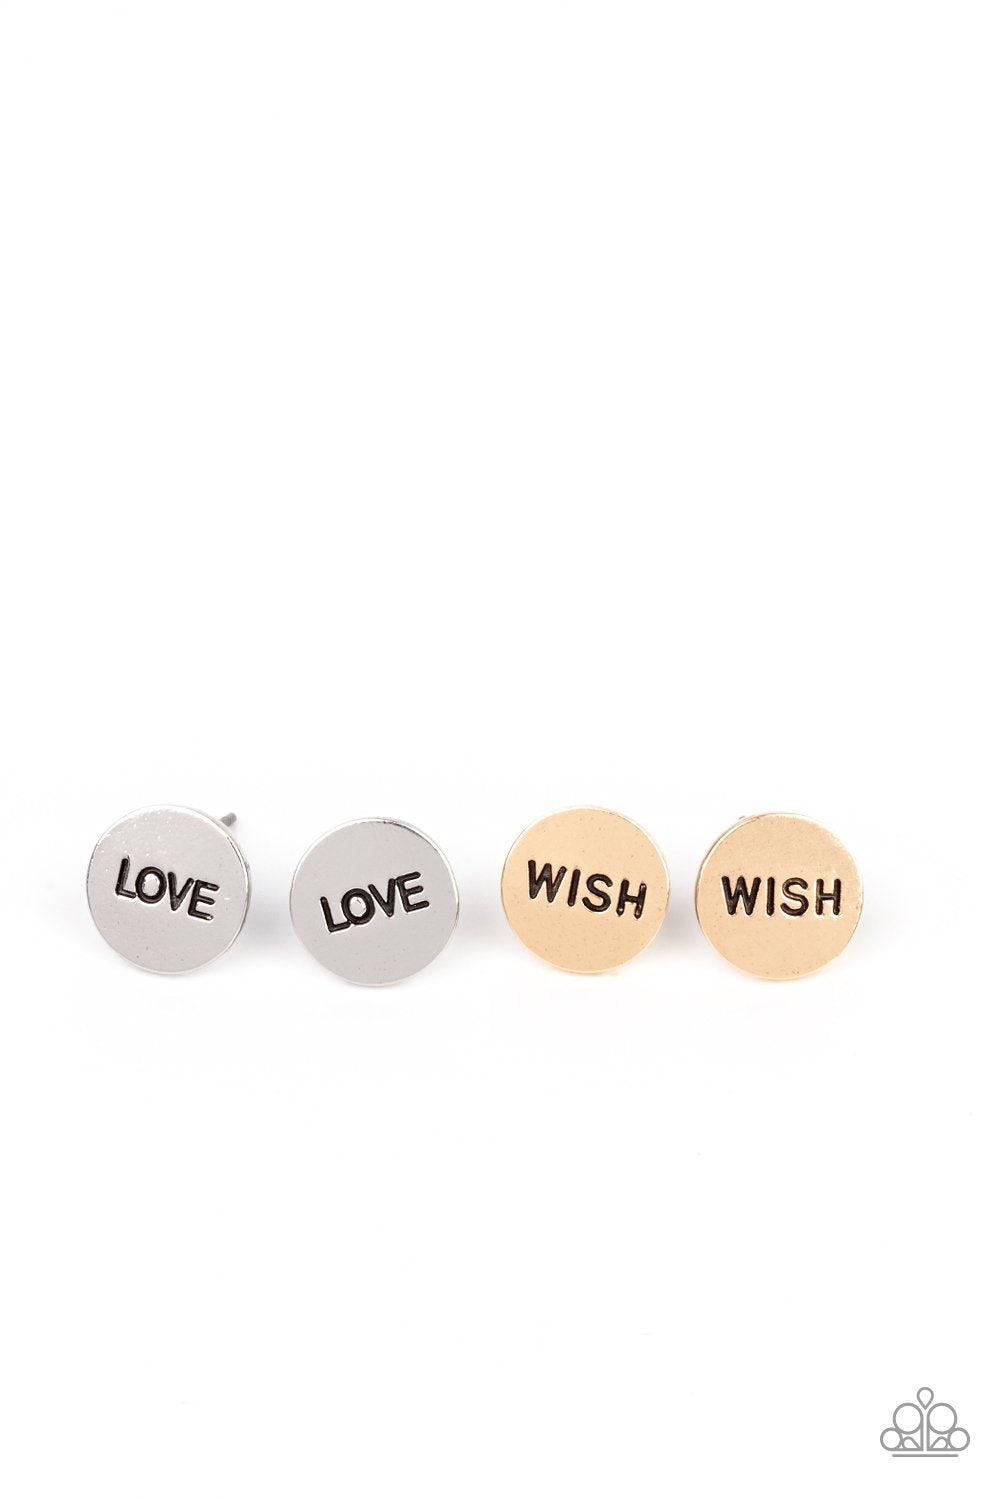 Starlet Shimmer Children's Gold and Silver Inspirational Post Earrings - Paparazzi Accessories (set of 10 pairs) - Full set -CarasShop.com - $5 Jewelry by Cara Jewels